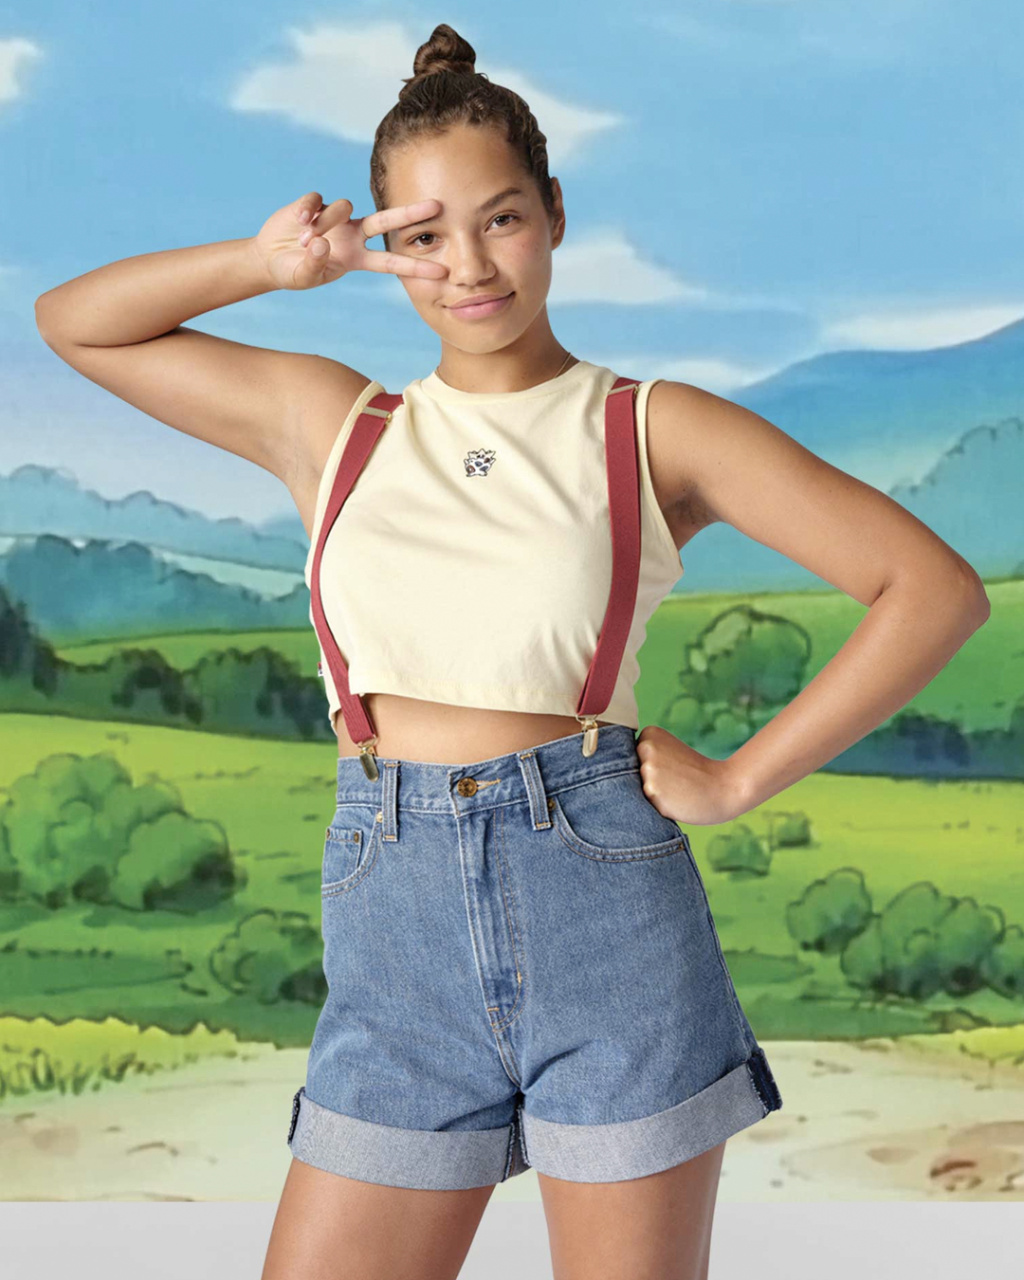 Levi's Just Announced A New Line Of Pokémon Clothing, And It Includes  Misty's Outfit | Nintendo Life